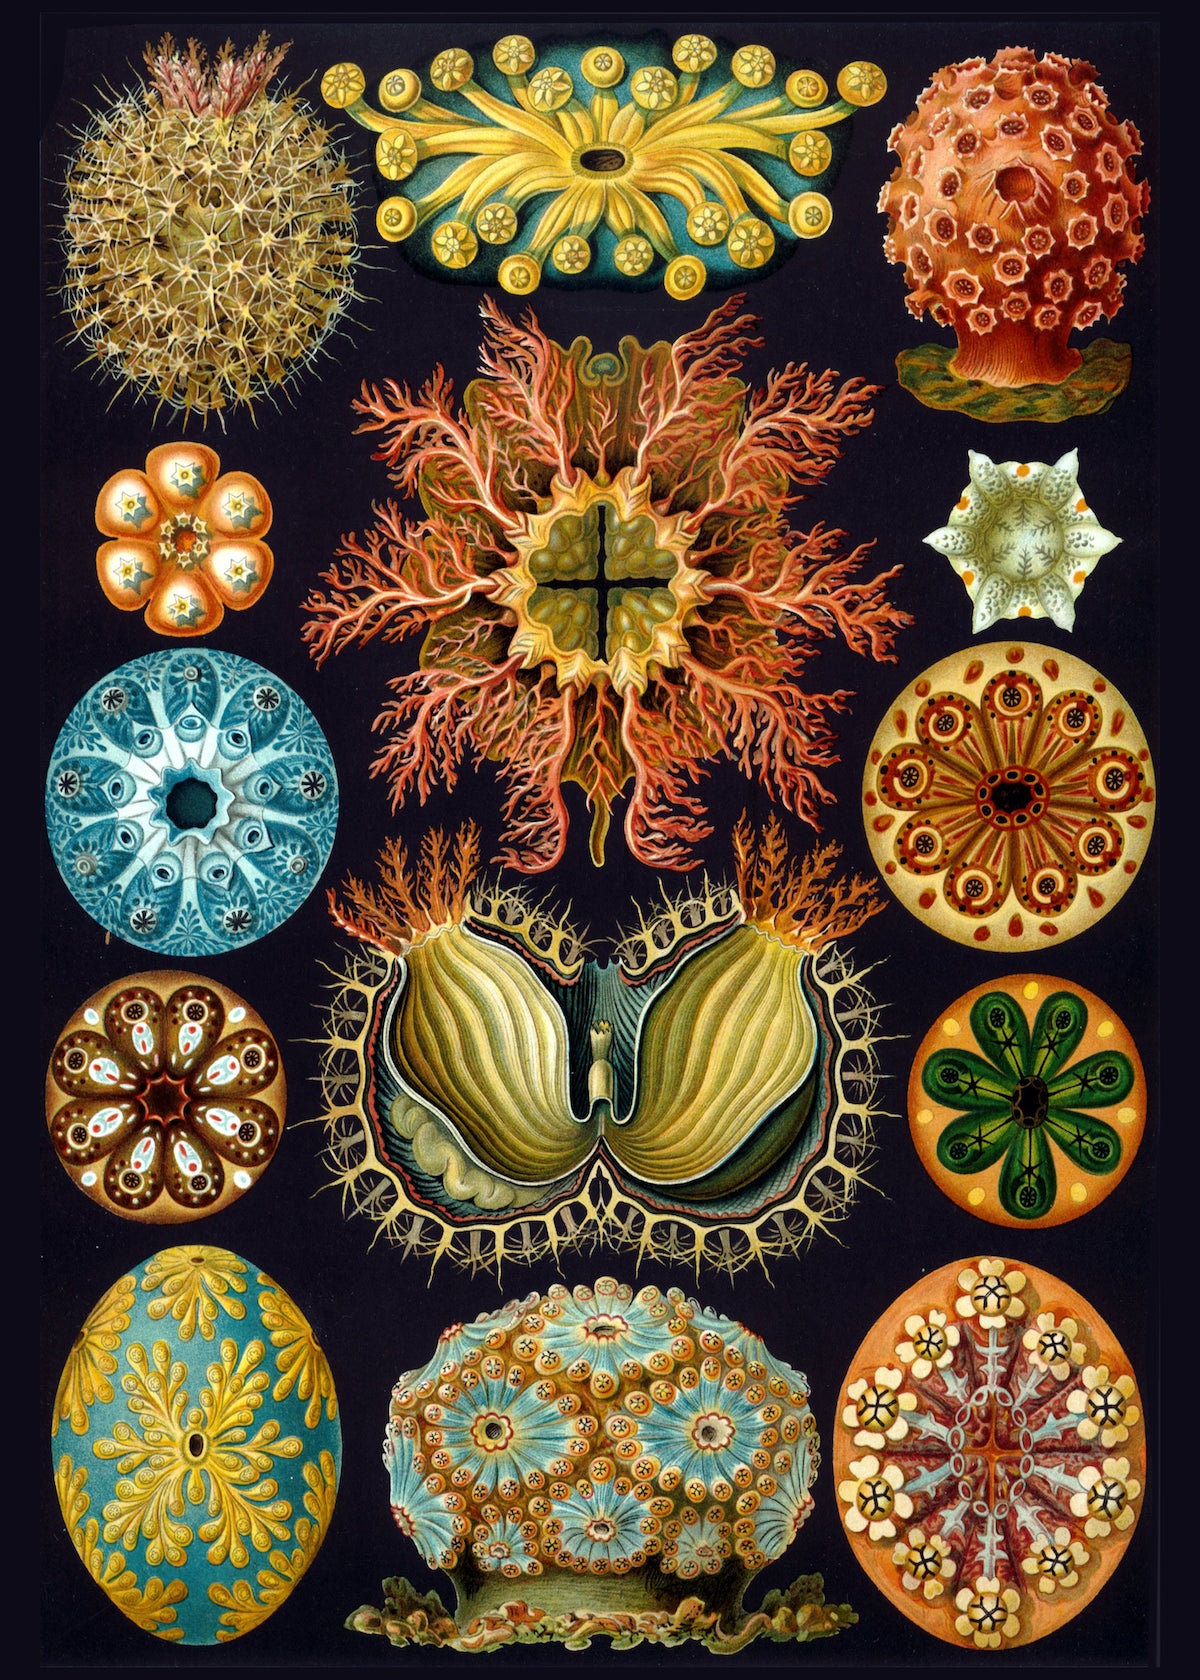 Wrapping paper featuring Ascidiae from Ernst Haeckel's Kunstformen der Natur (Art forms of Nature) of 1904.